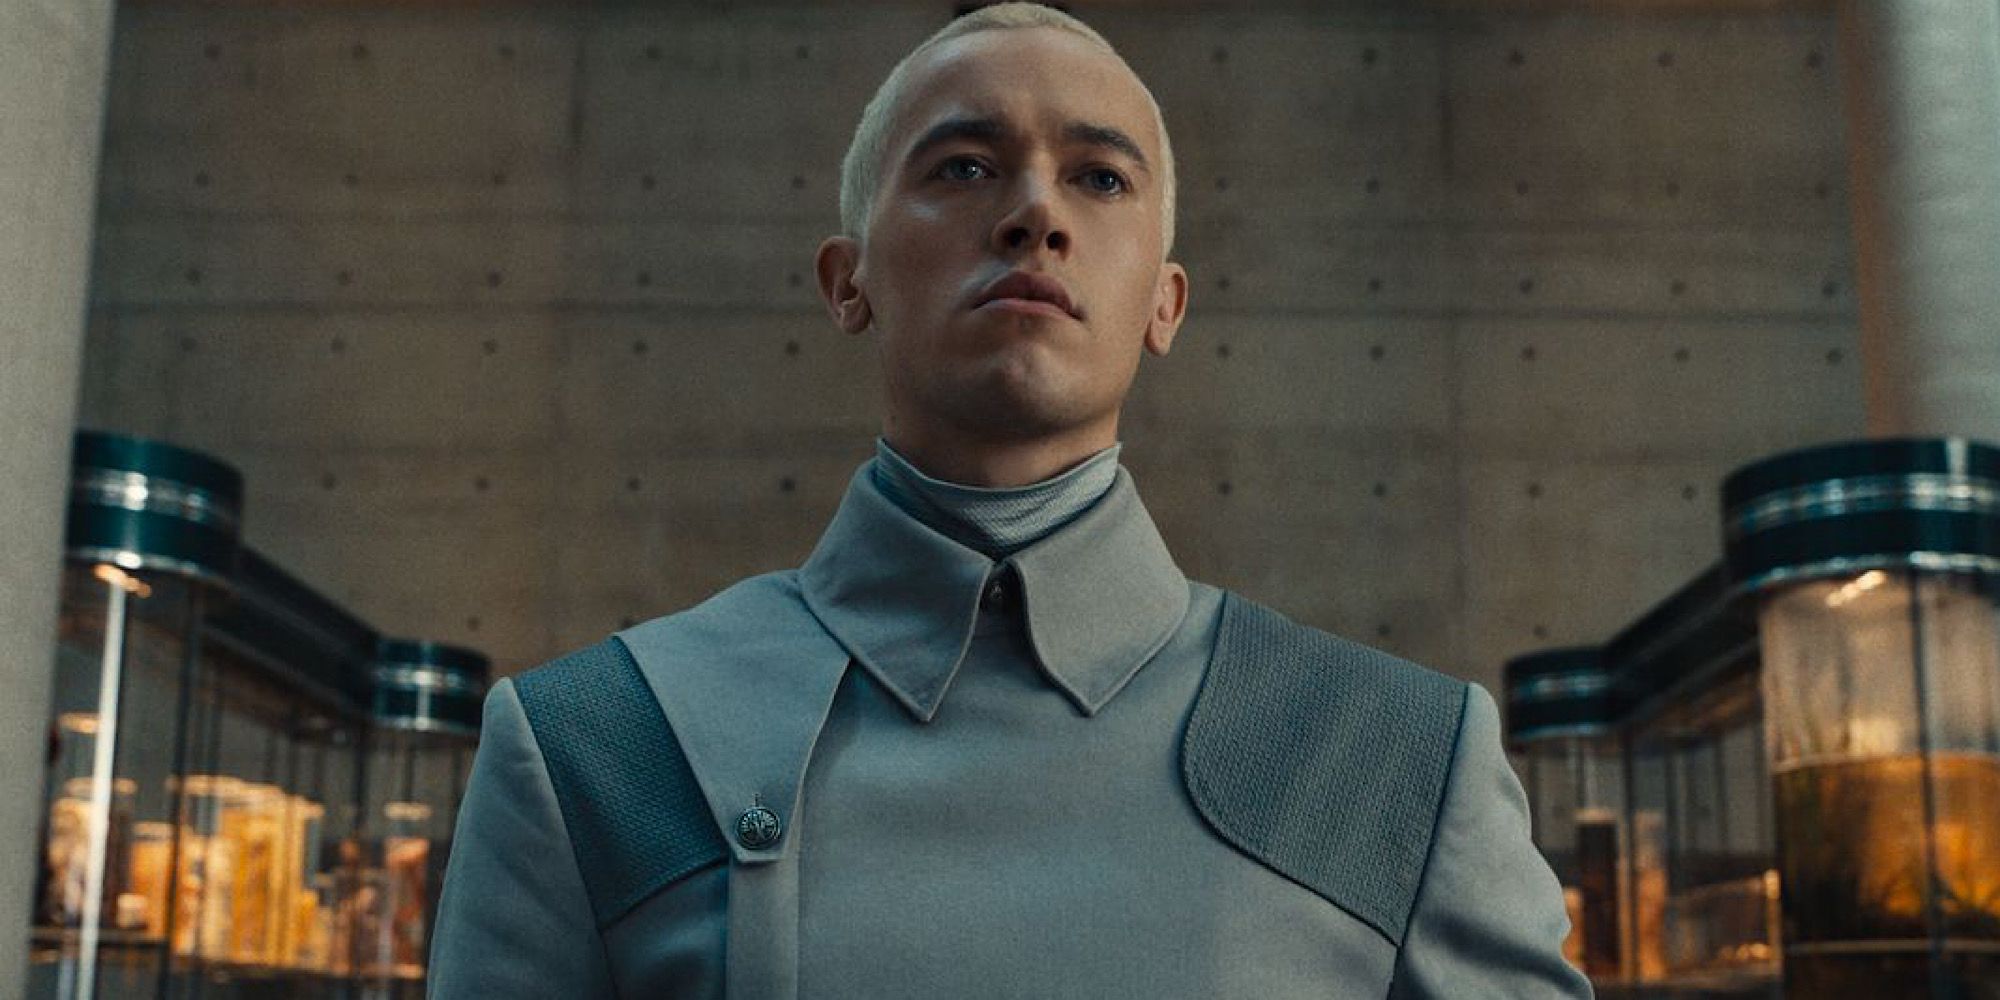 Coriolanus Snow wears his Peacekeeper uniform in The Hunger Games: The Ballad of Songbirds and Snakes.